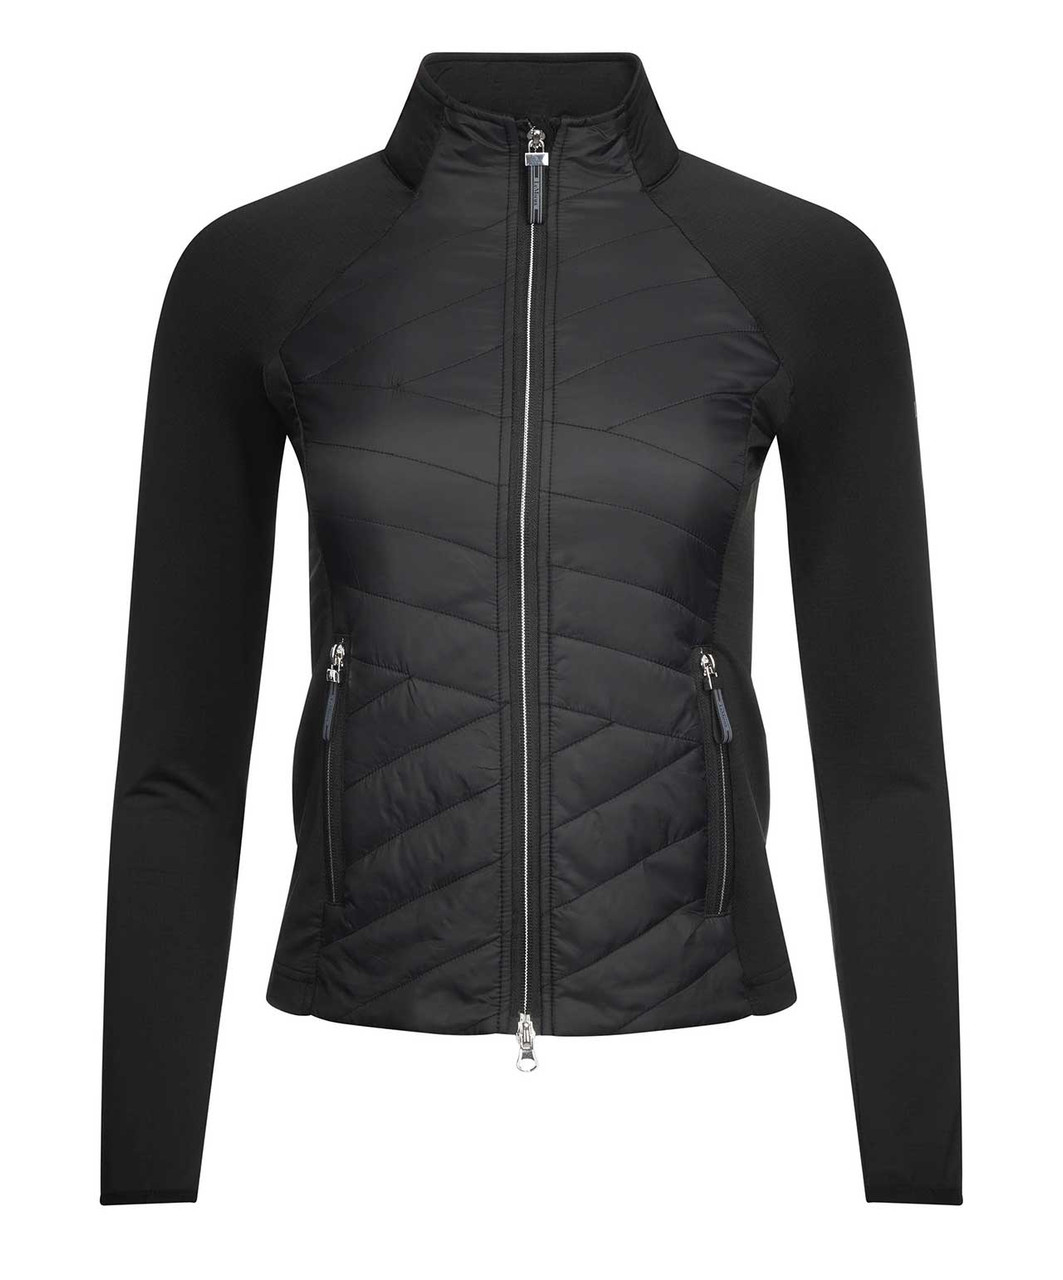 Le Mieux Astra Jacket - Sprucewood Tack